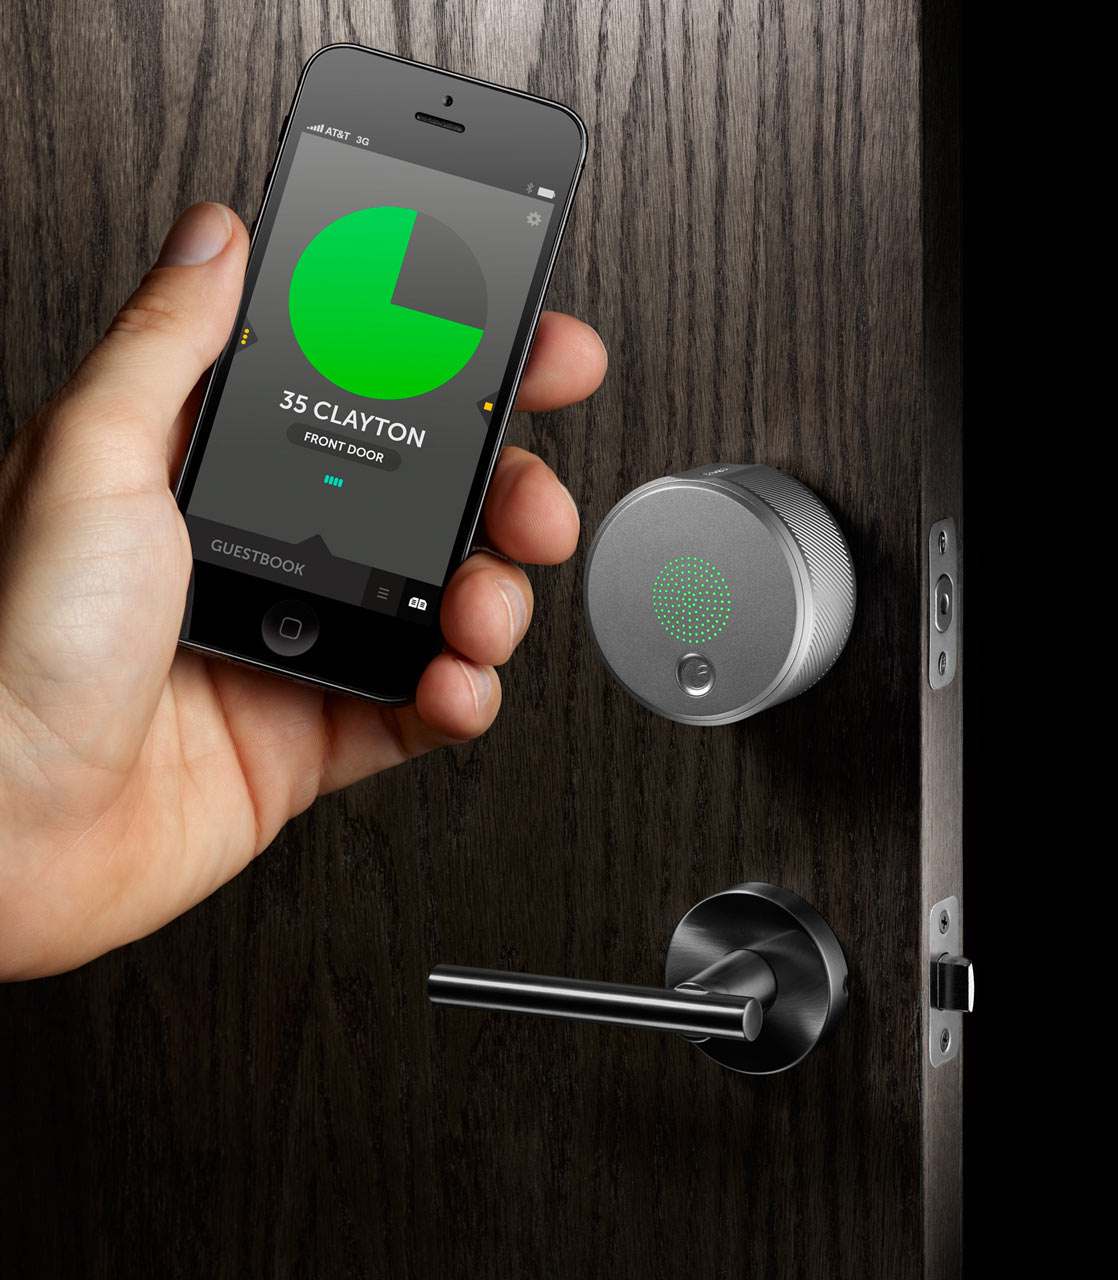 August Smart Lock Turns Your Phone Into House Keys